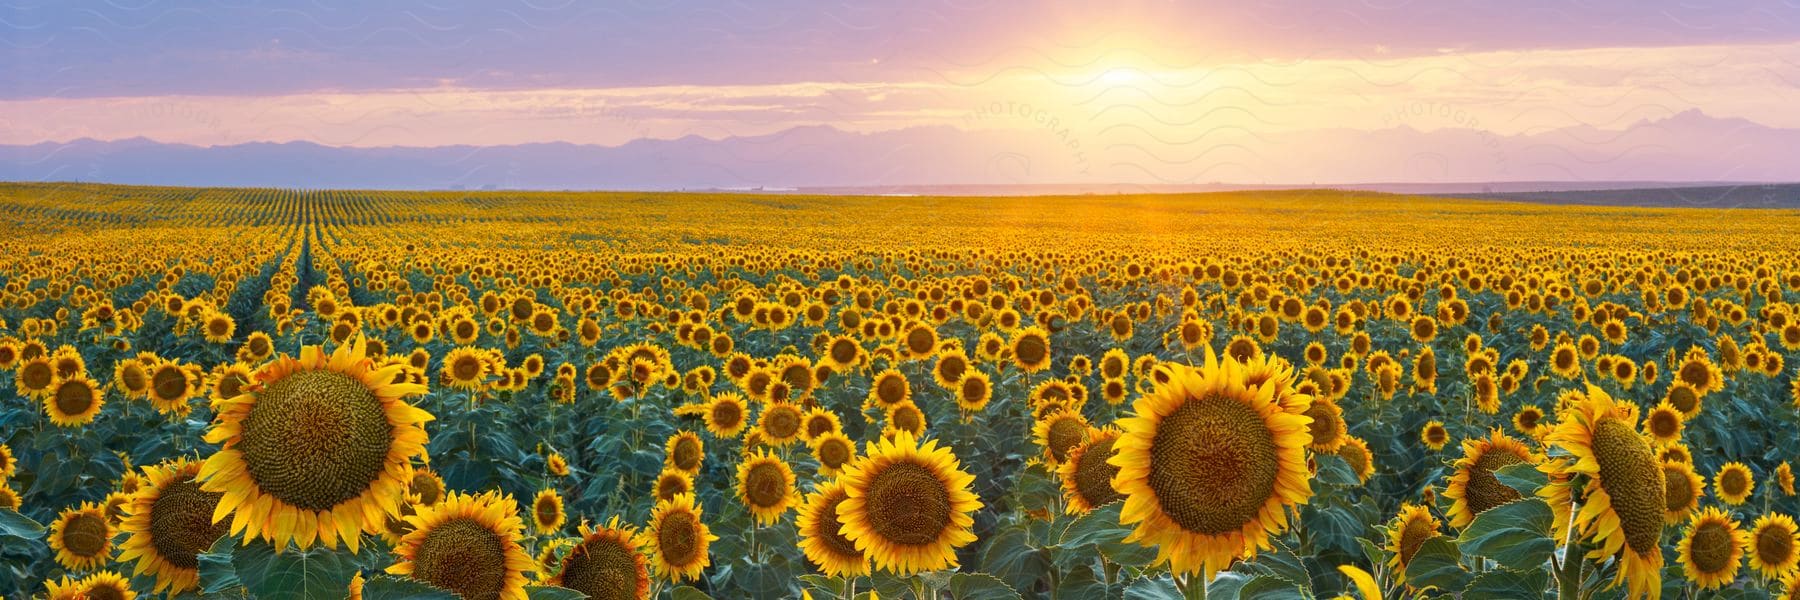 Sun setting above a field of sunflowers in eastern colorado